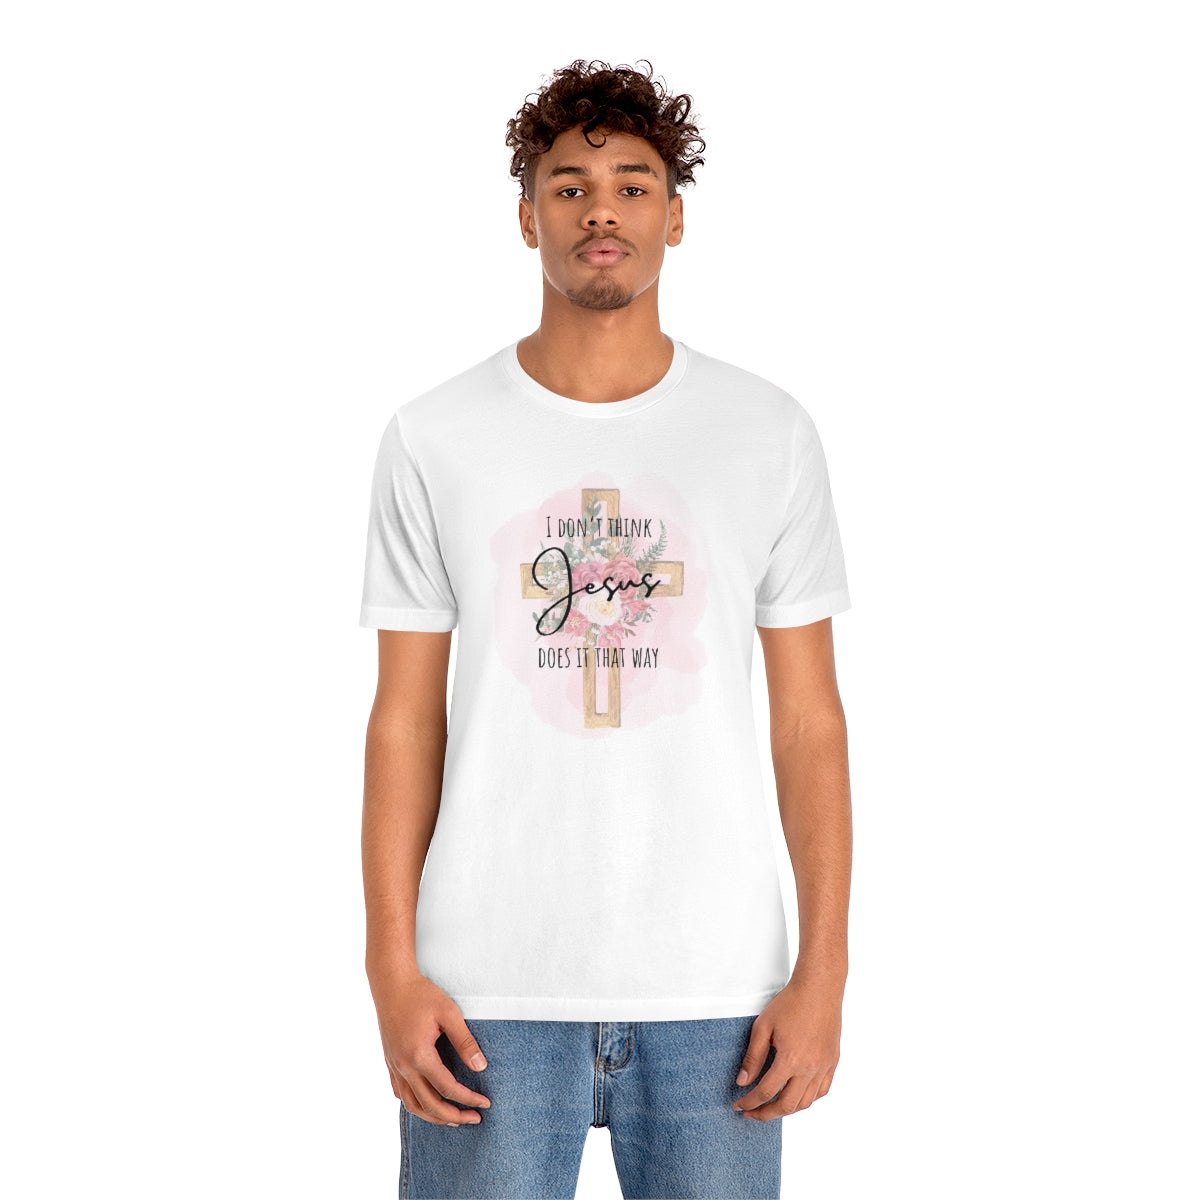 I do not think Jesus does it that way pink watercolor Bella Canvas Jersey Short Sleeve Tee